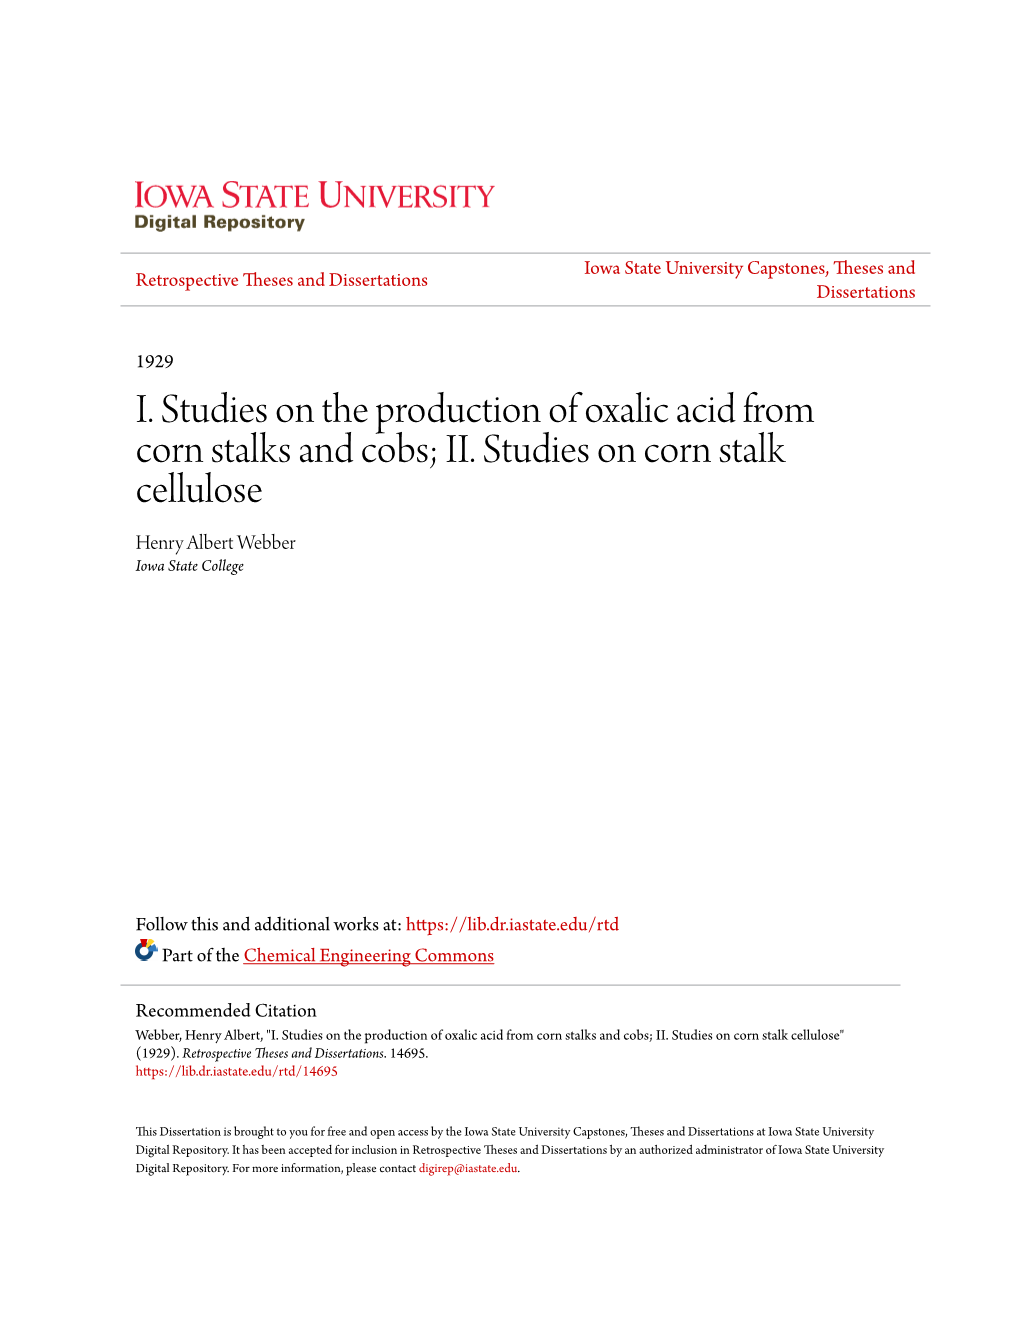 I. Studies on the Production of Oxalic Acid from Corn Stalks and Cobs; II